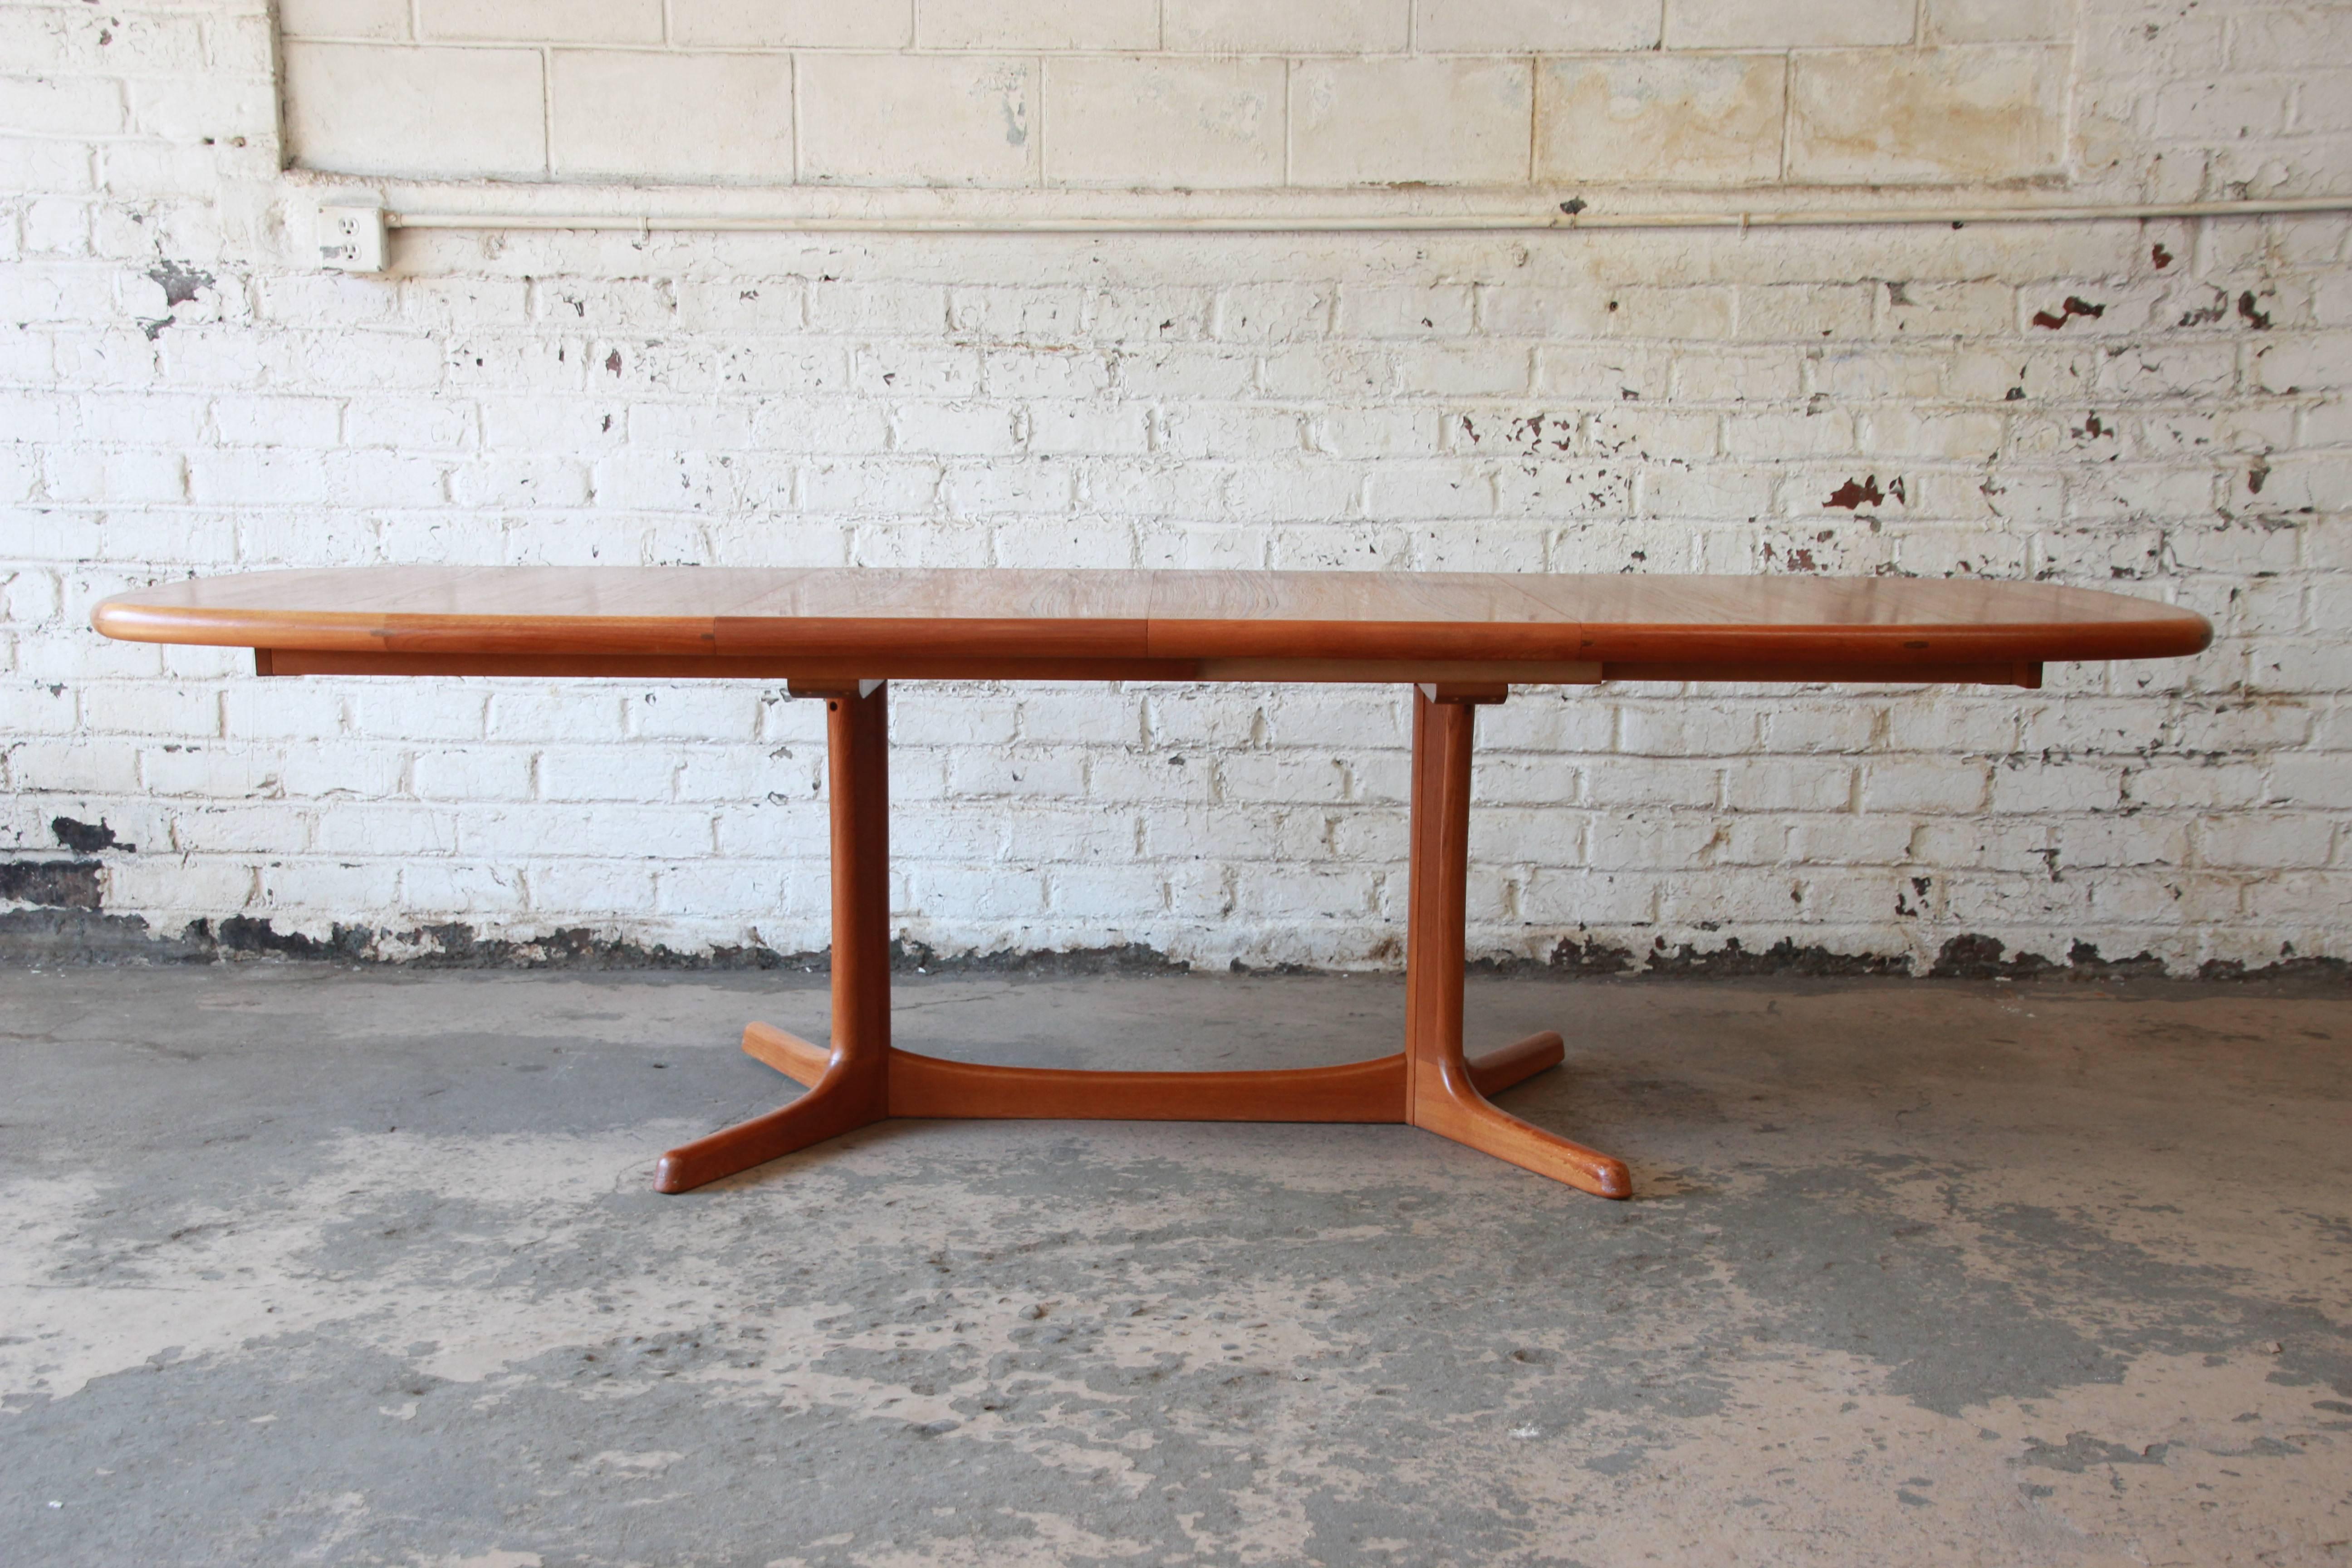 A beautiful Danish Modern teak extension dining table by Dyrlund, circa 1970s. The table features gorgeous teak wood grain and a unique sculptural pedestal base. The table measures 64